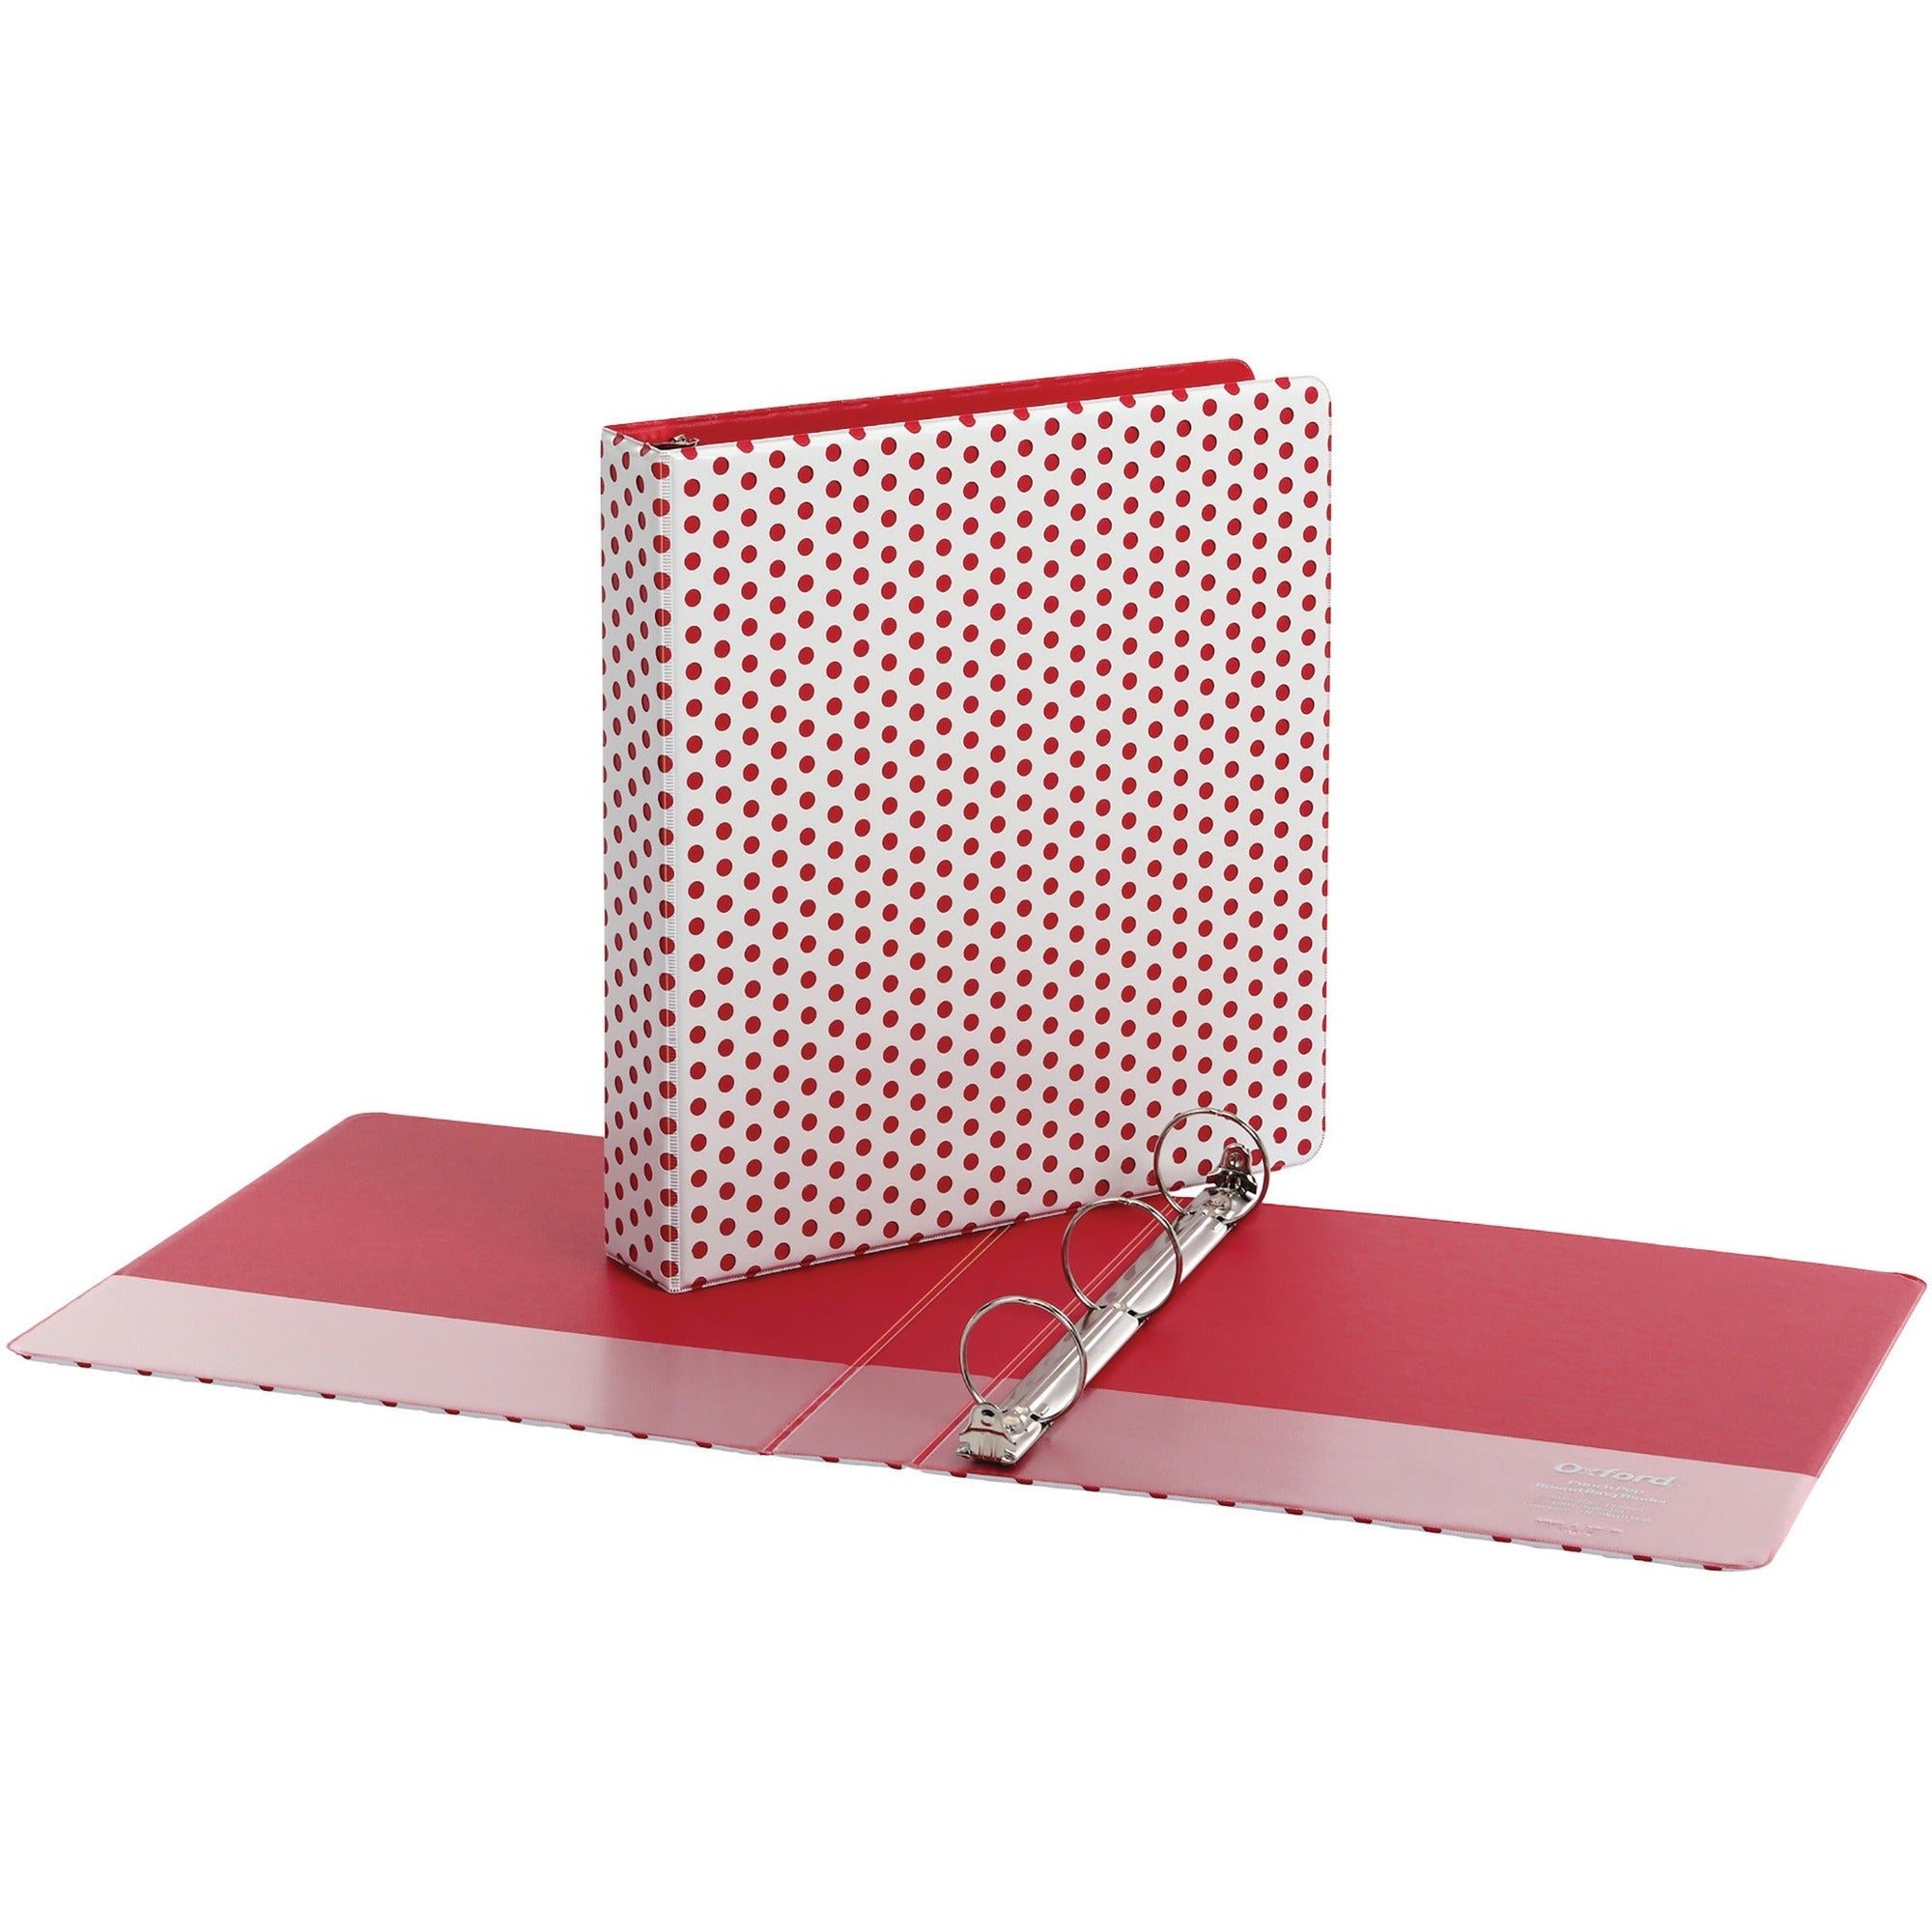 oxford-1-1-2-back-mounted-round-ring-binder-1-1-2-binder-capacity-350-sheet-capacity-round-ring-fasteners-2-internal-pockets-red-1-each_oxf42654 - 1